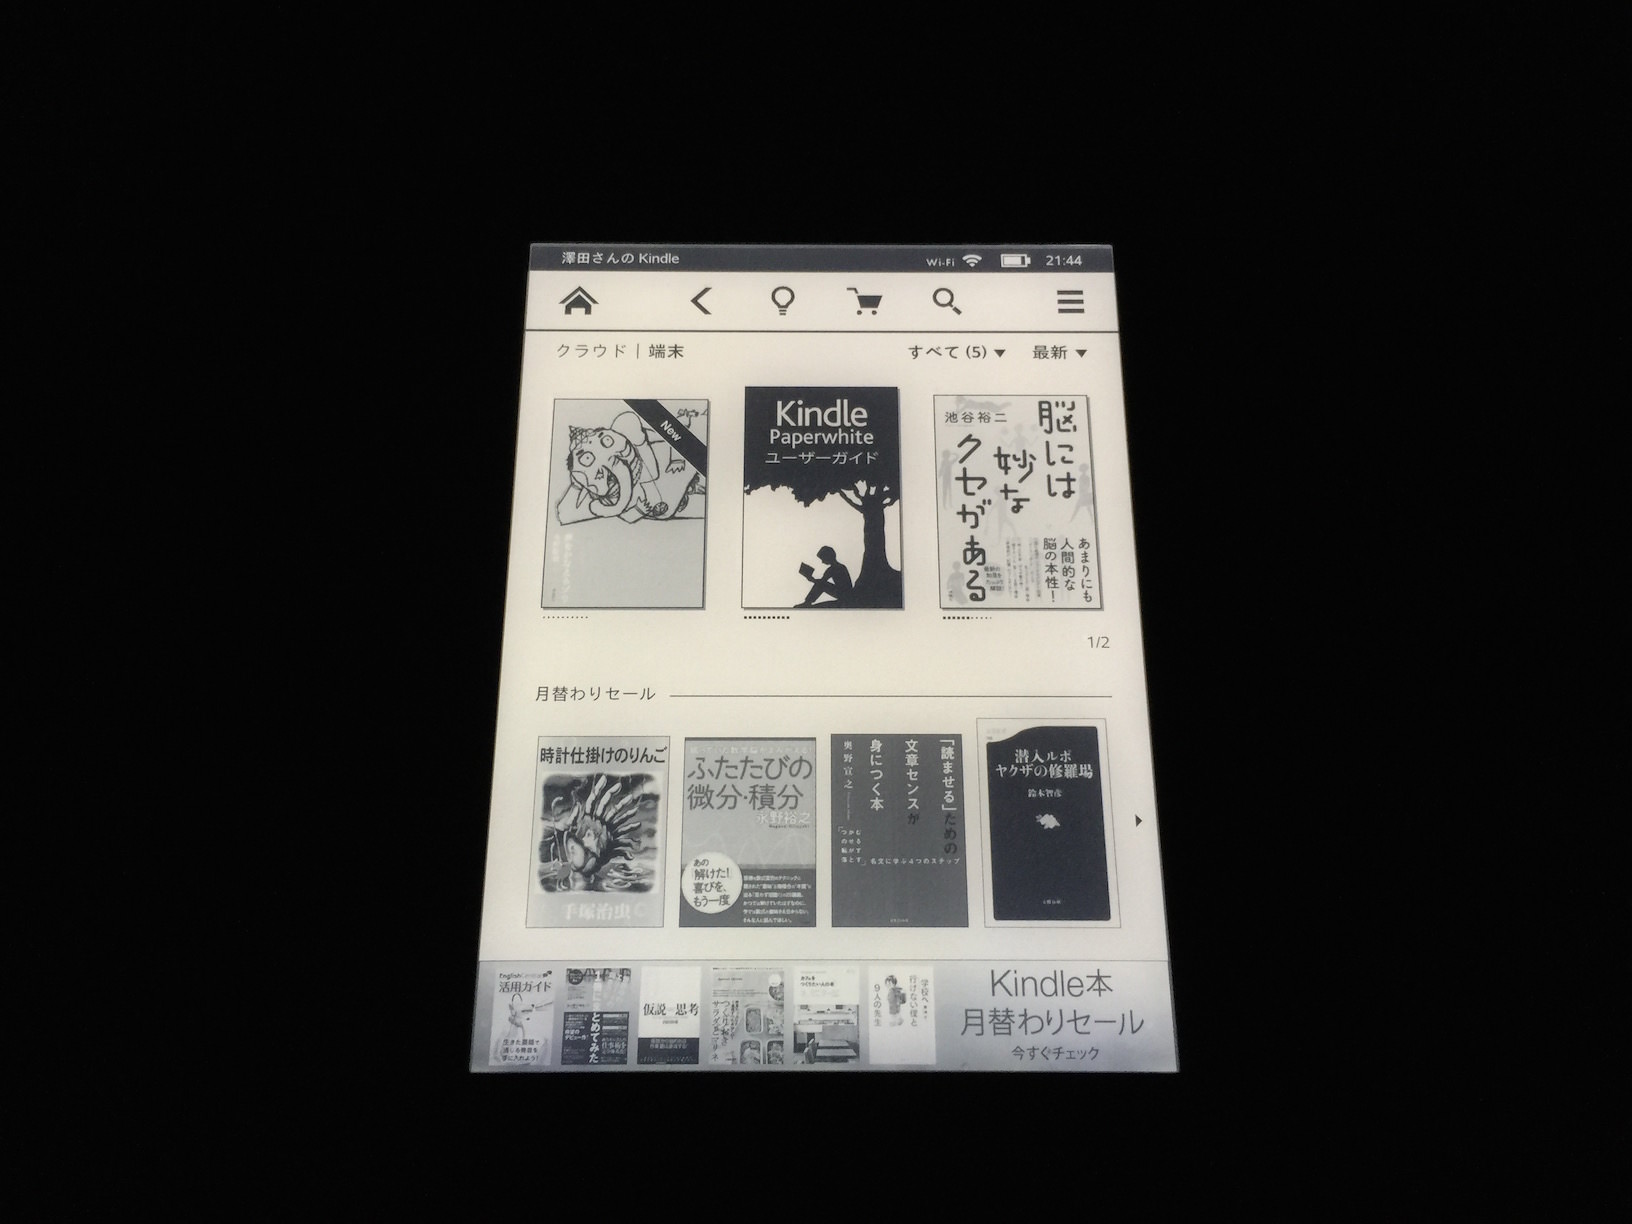 Kindle paperwhite new model 2015 review 11